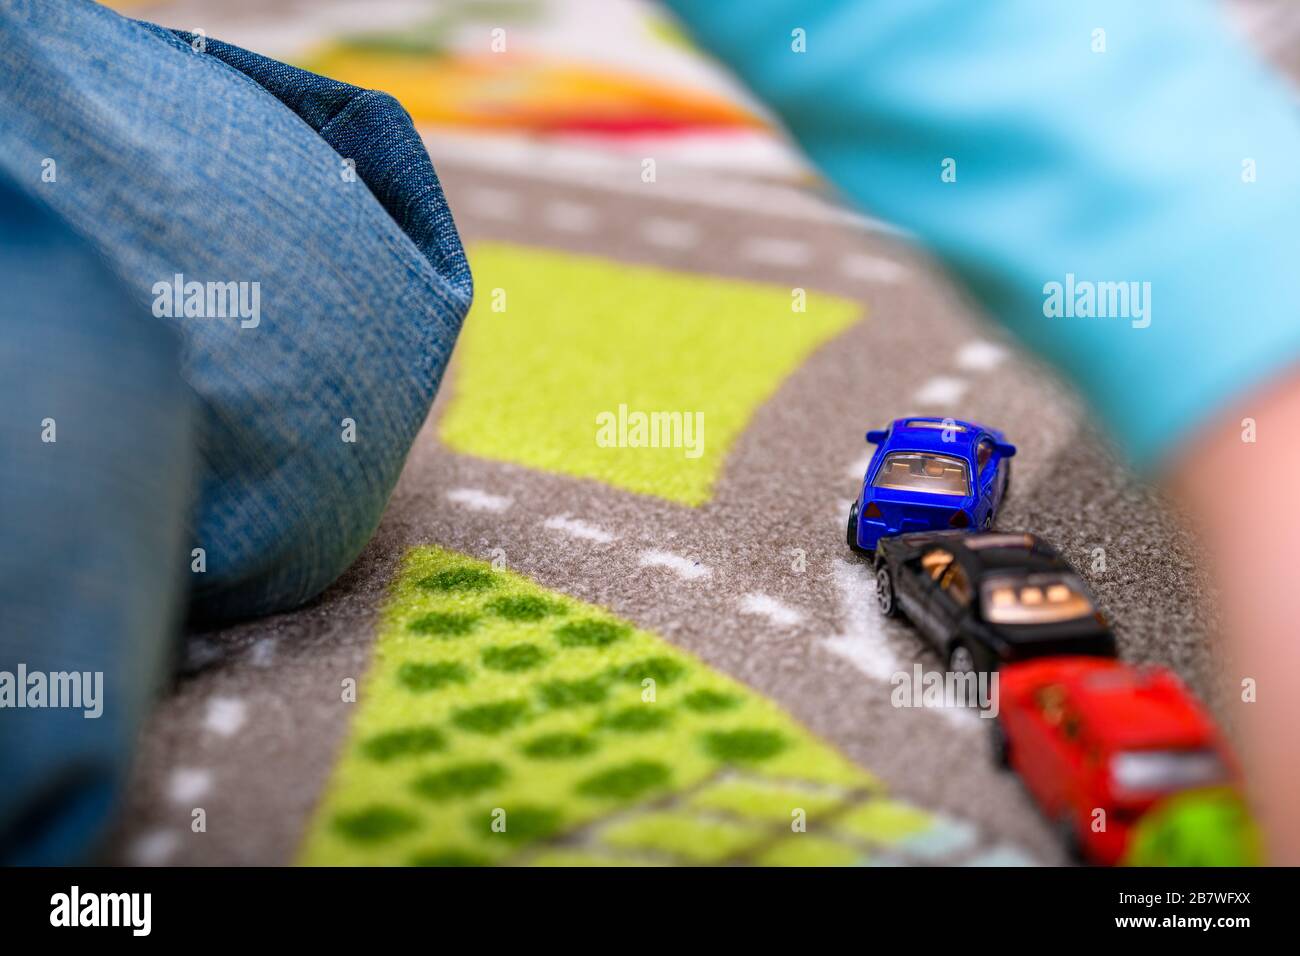 Close-up of five year old boy playing and lining up toy cars on a playing mat with roads. The cars have vivid colors. Stock Photo